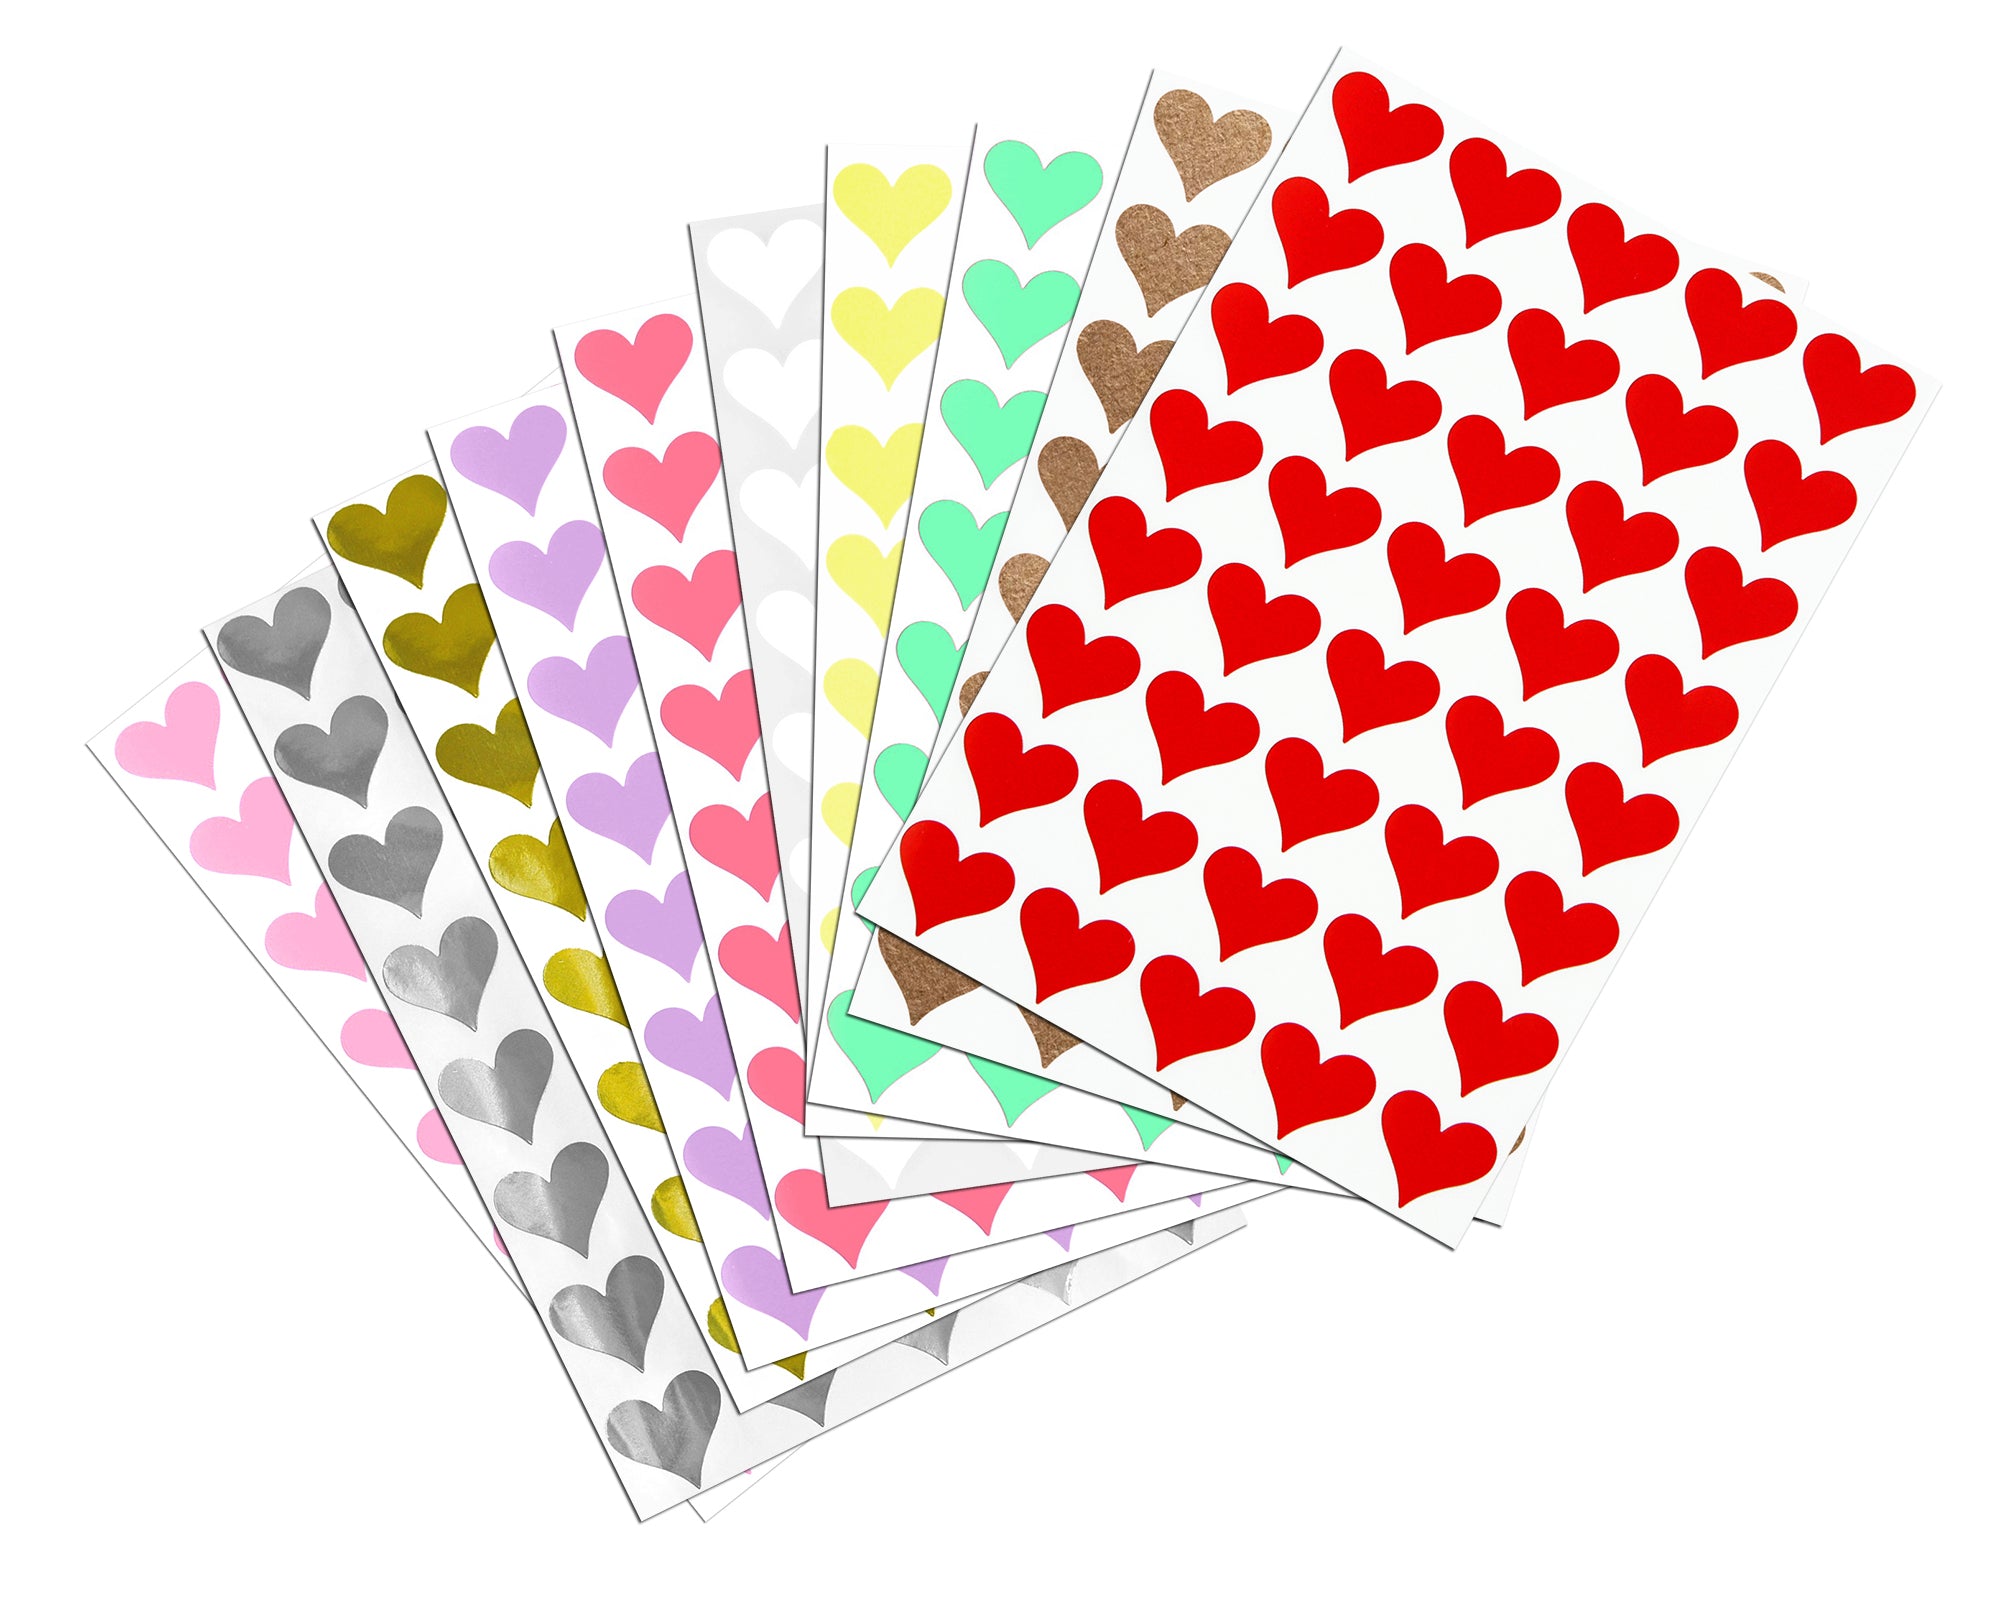 Heart Stickers Labels 3/4 inch 19mm 200 / Rose Gold